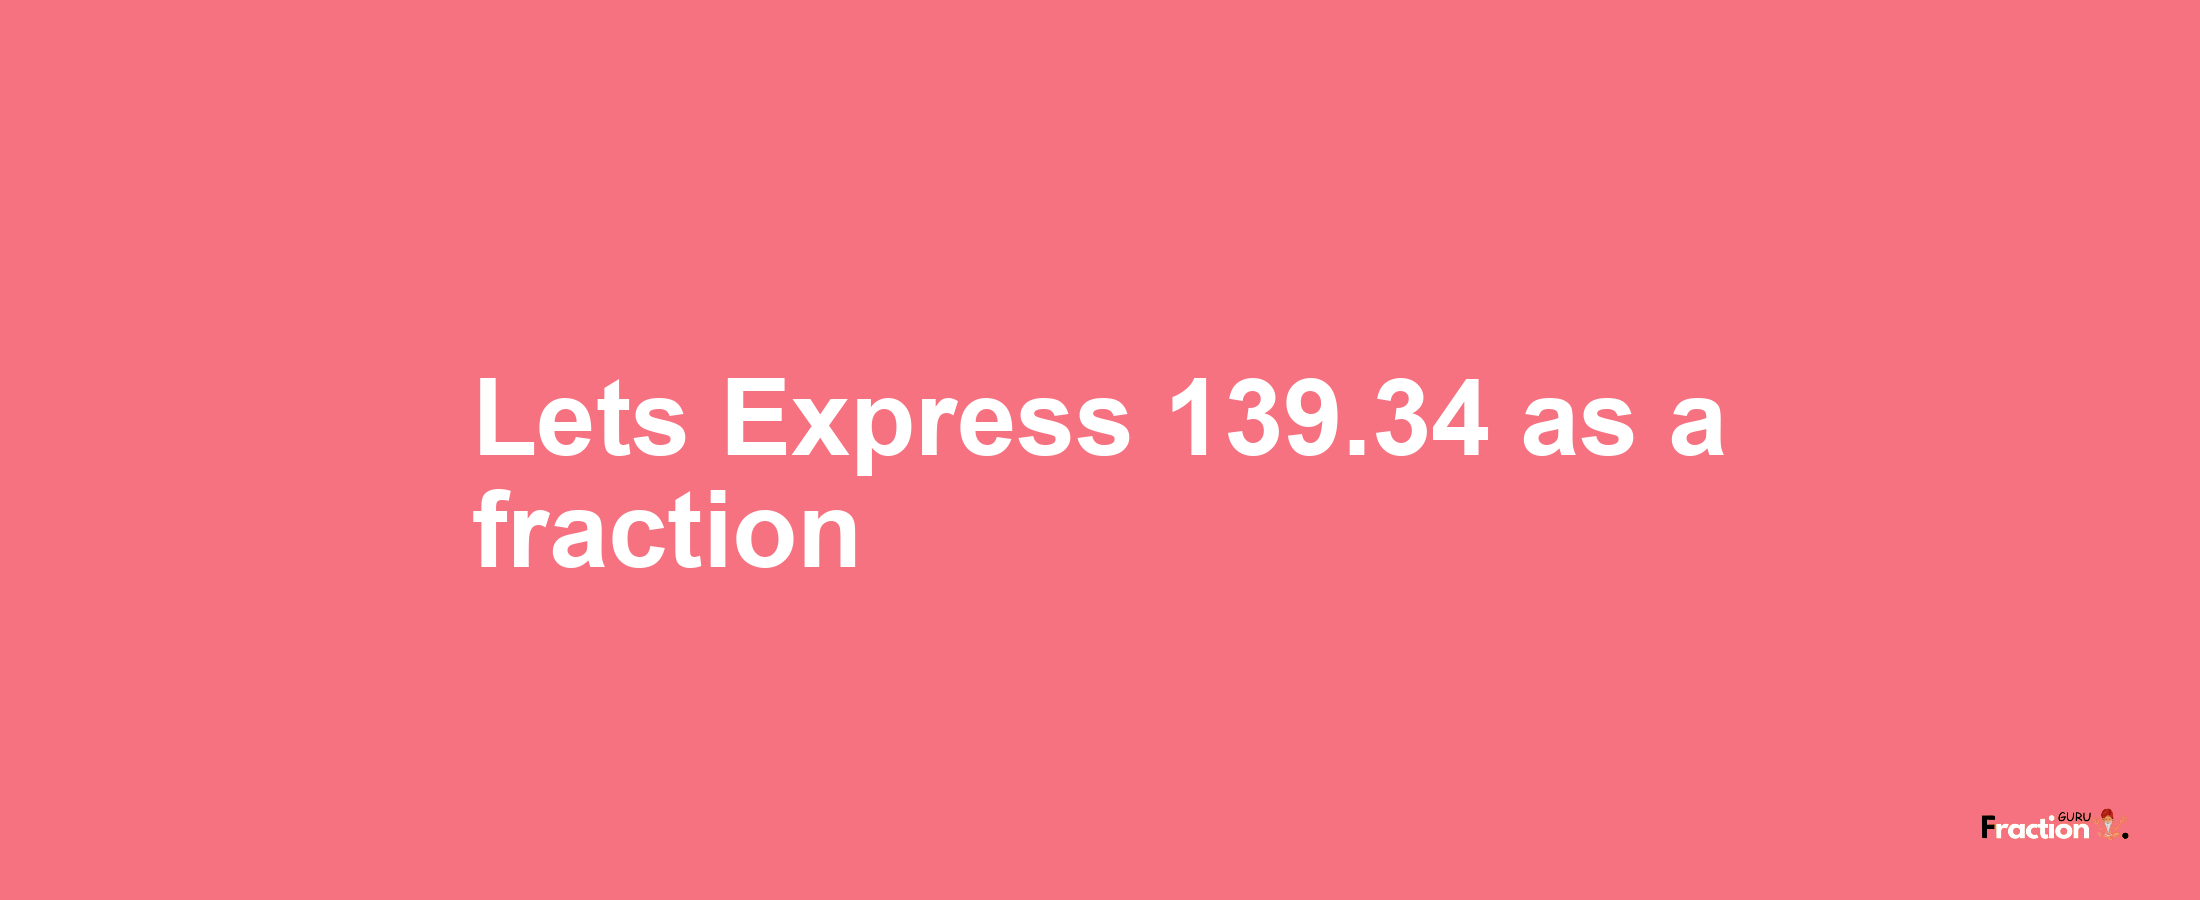 Lets Express 139.34 as afraction